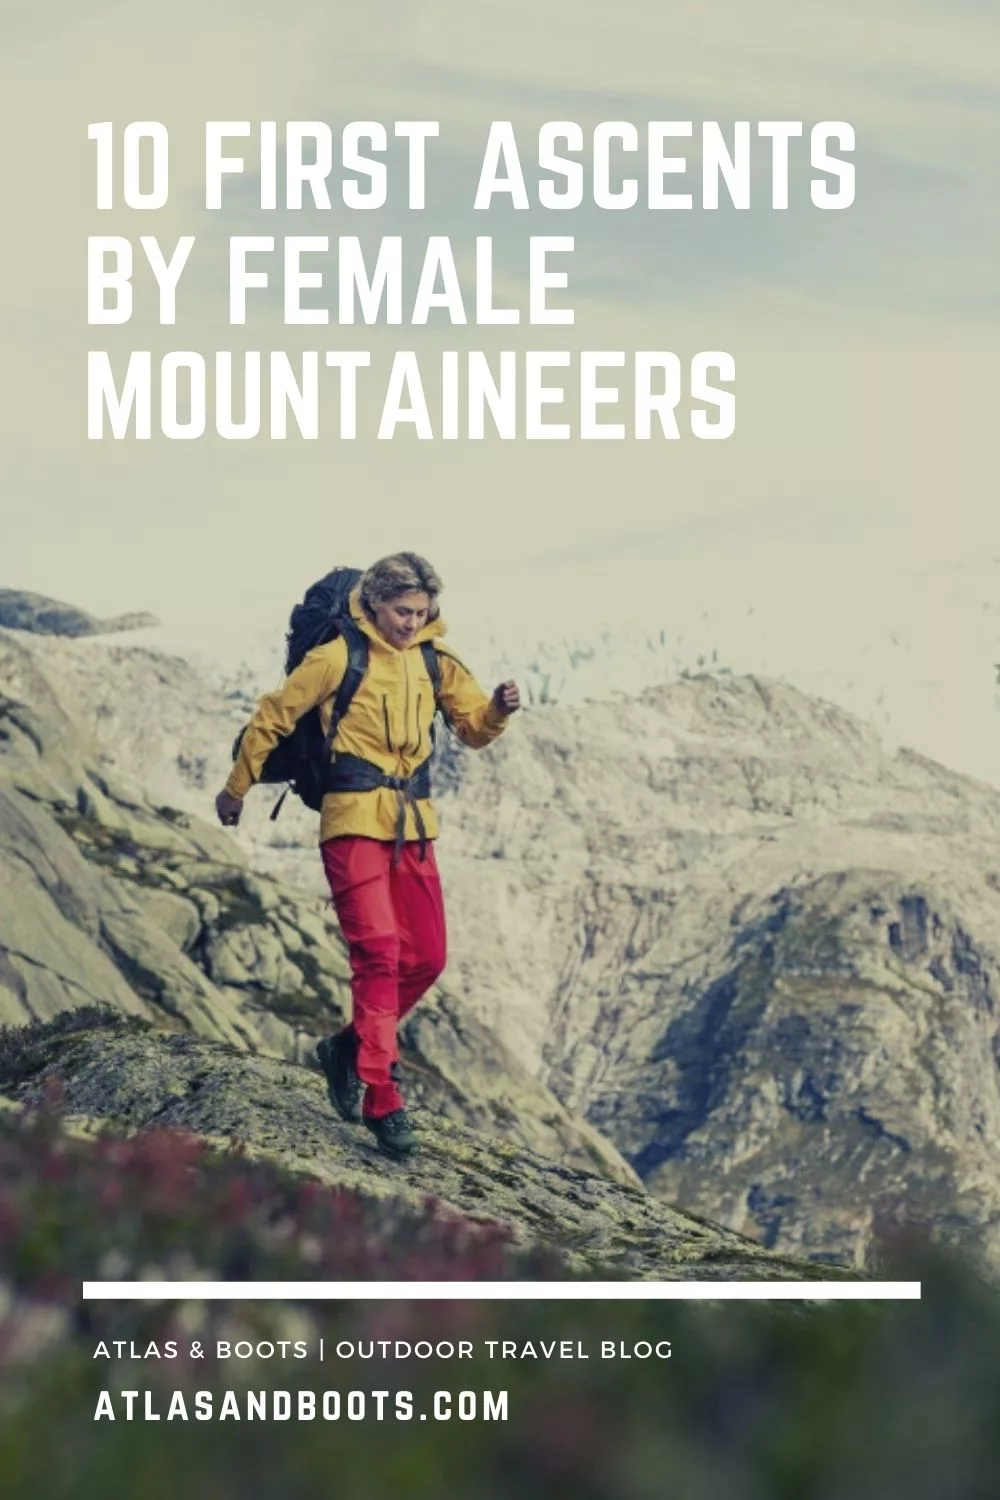 Ice work: 10 first ascents by female mountaineers